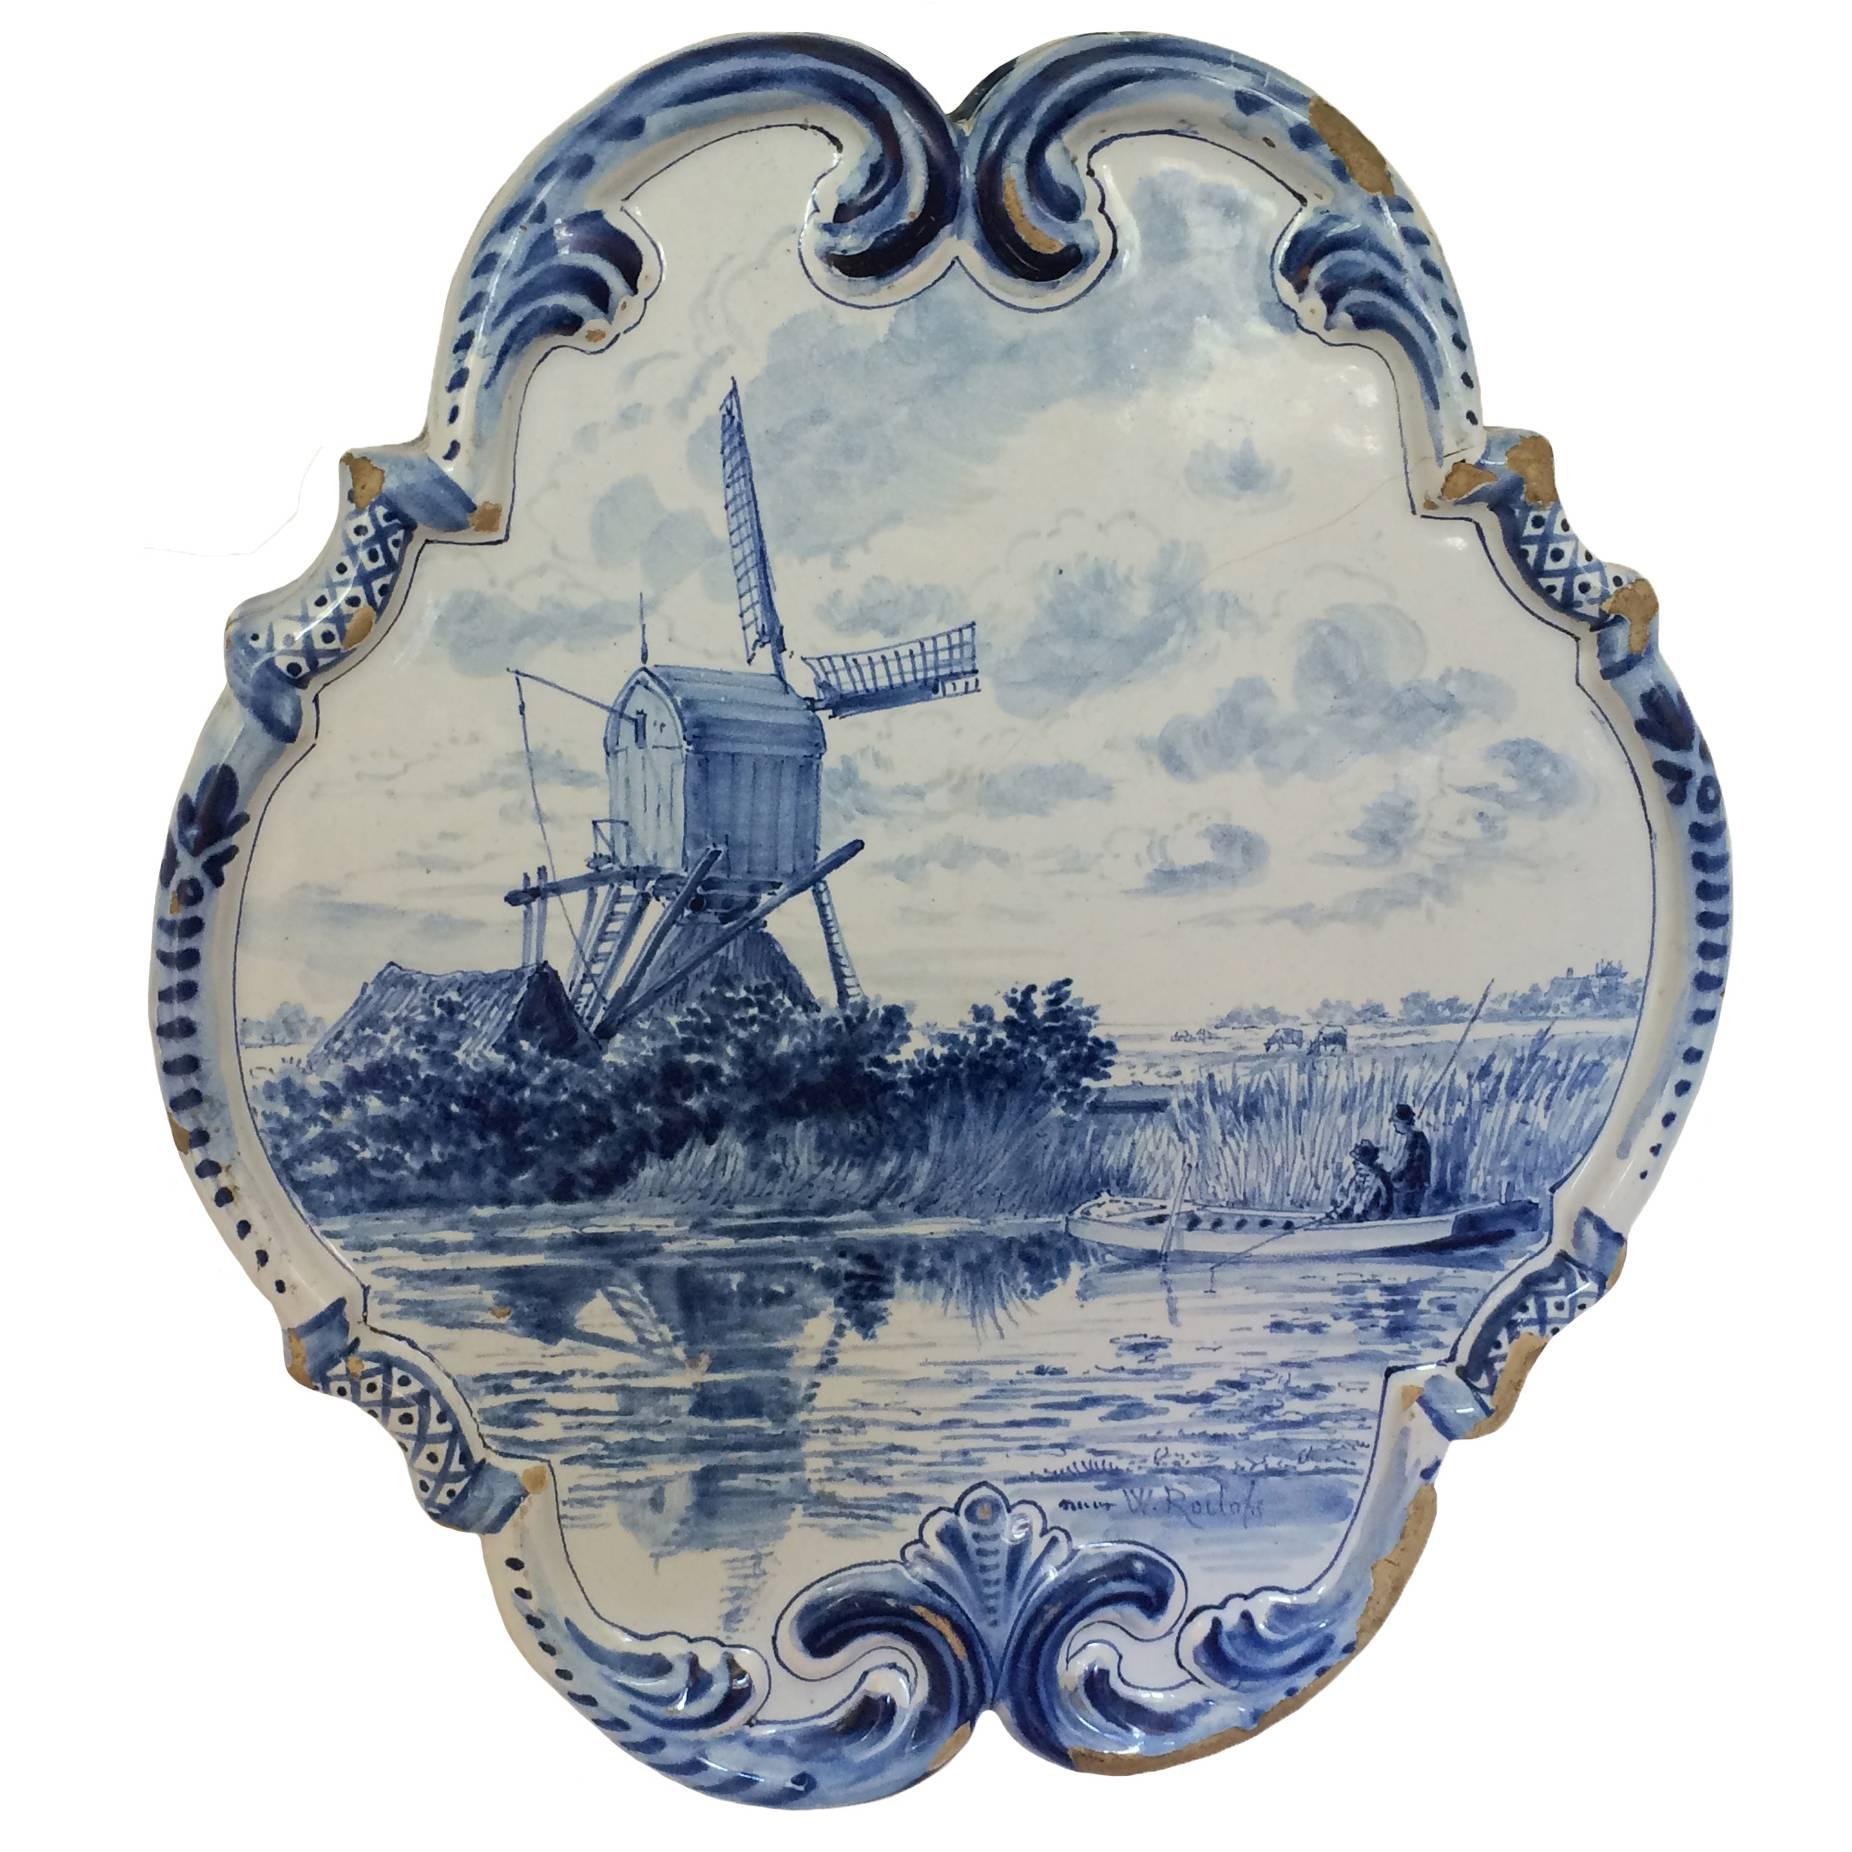 Blue and white delft wall plaque; two men in a boat fishing in a lake with cattail border; windmill in the background; beautifully detailed raised border; 18th century.